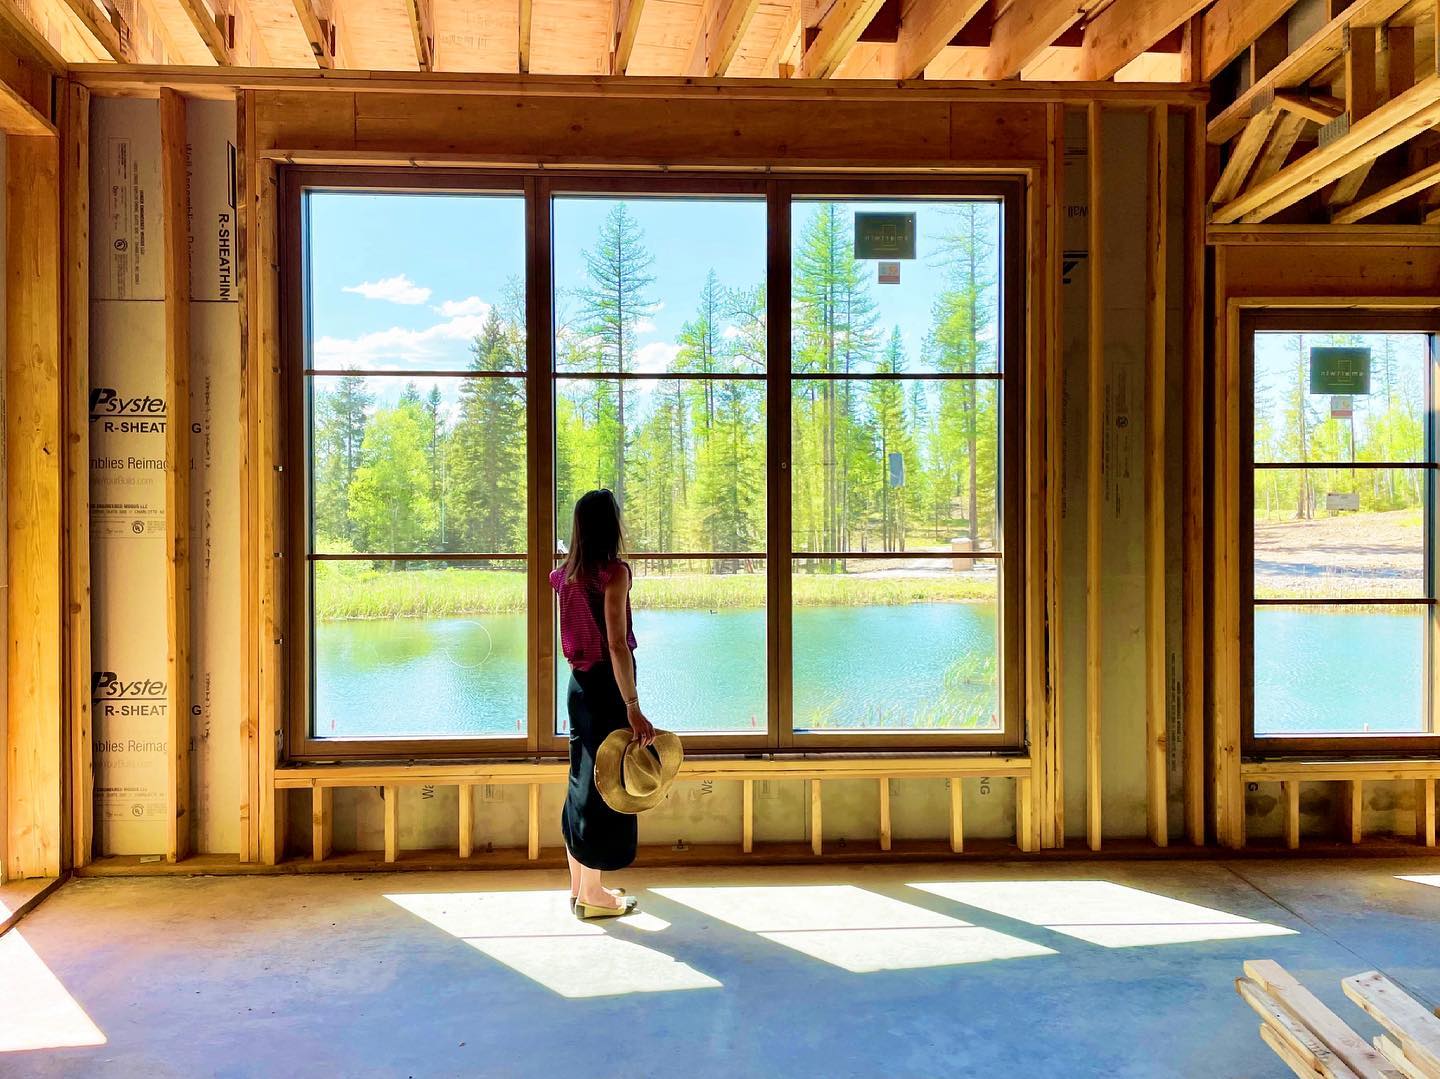 Windows to scale  (I’m roughly 5 feet) so they seem big enough! whitefish custom home builder